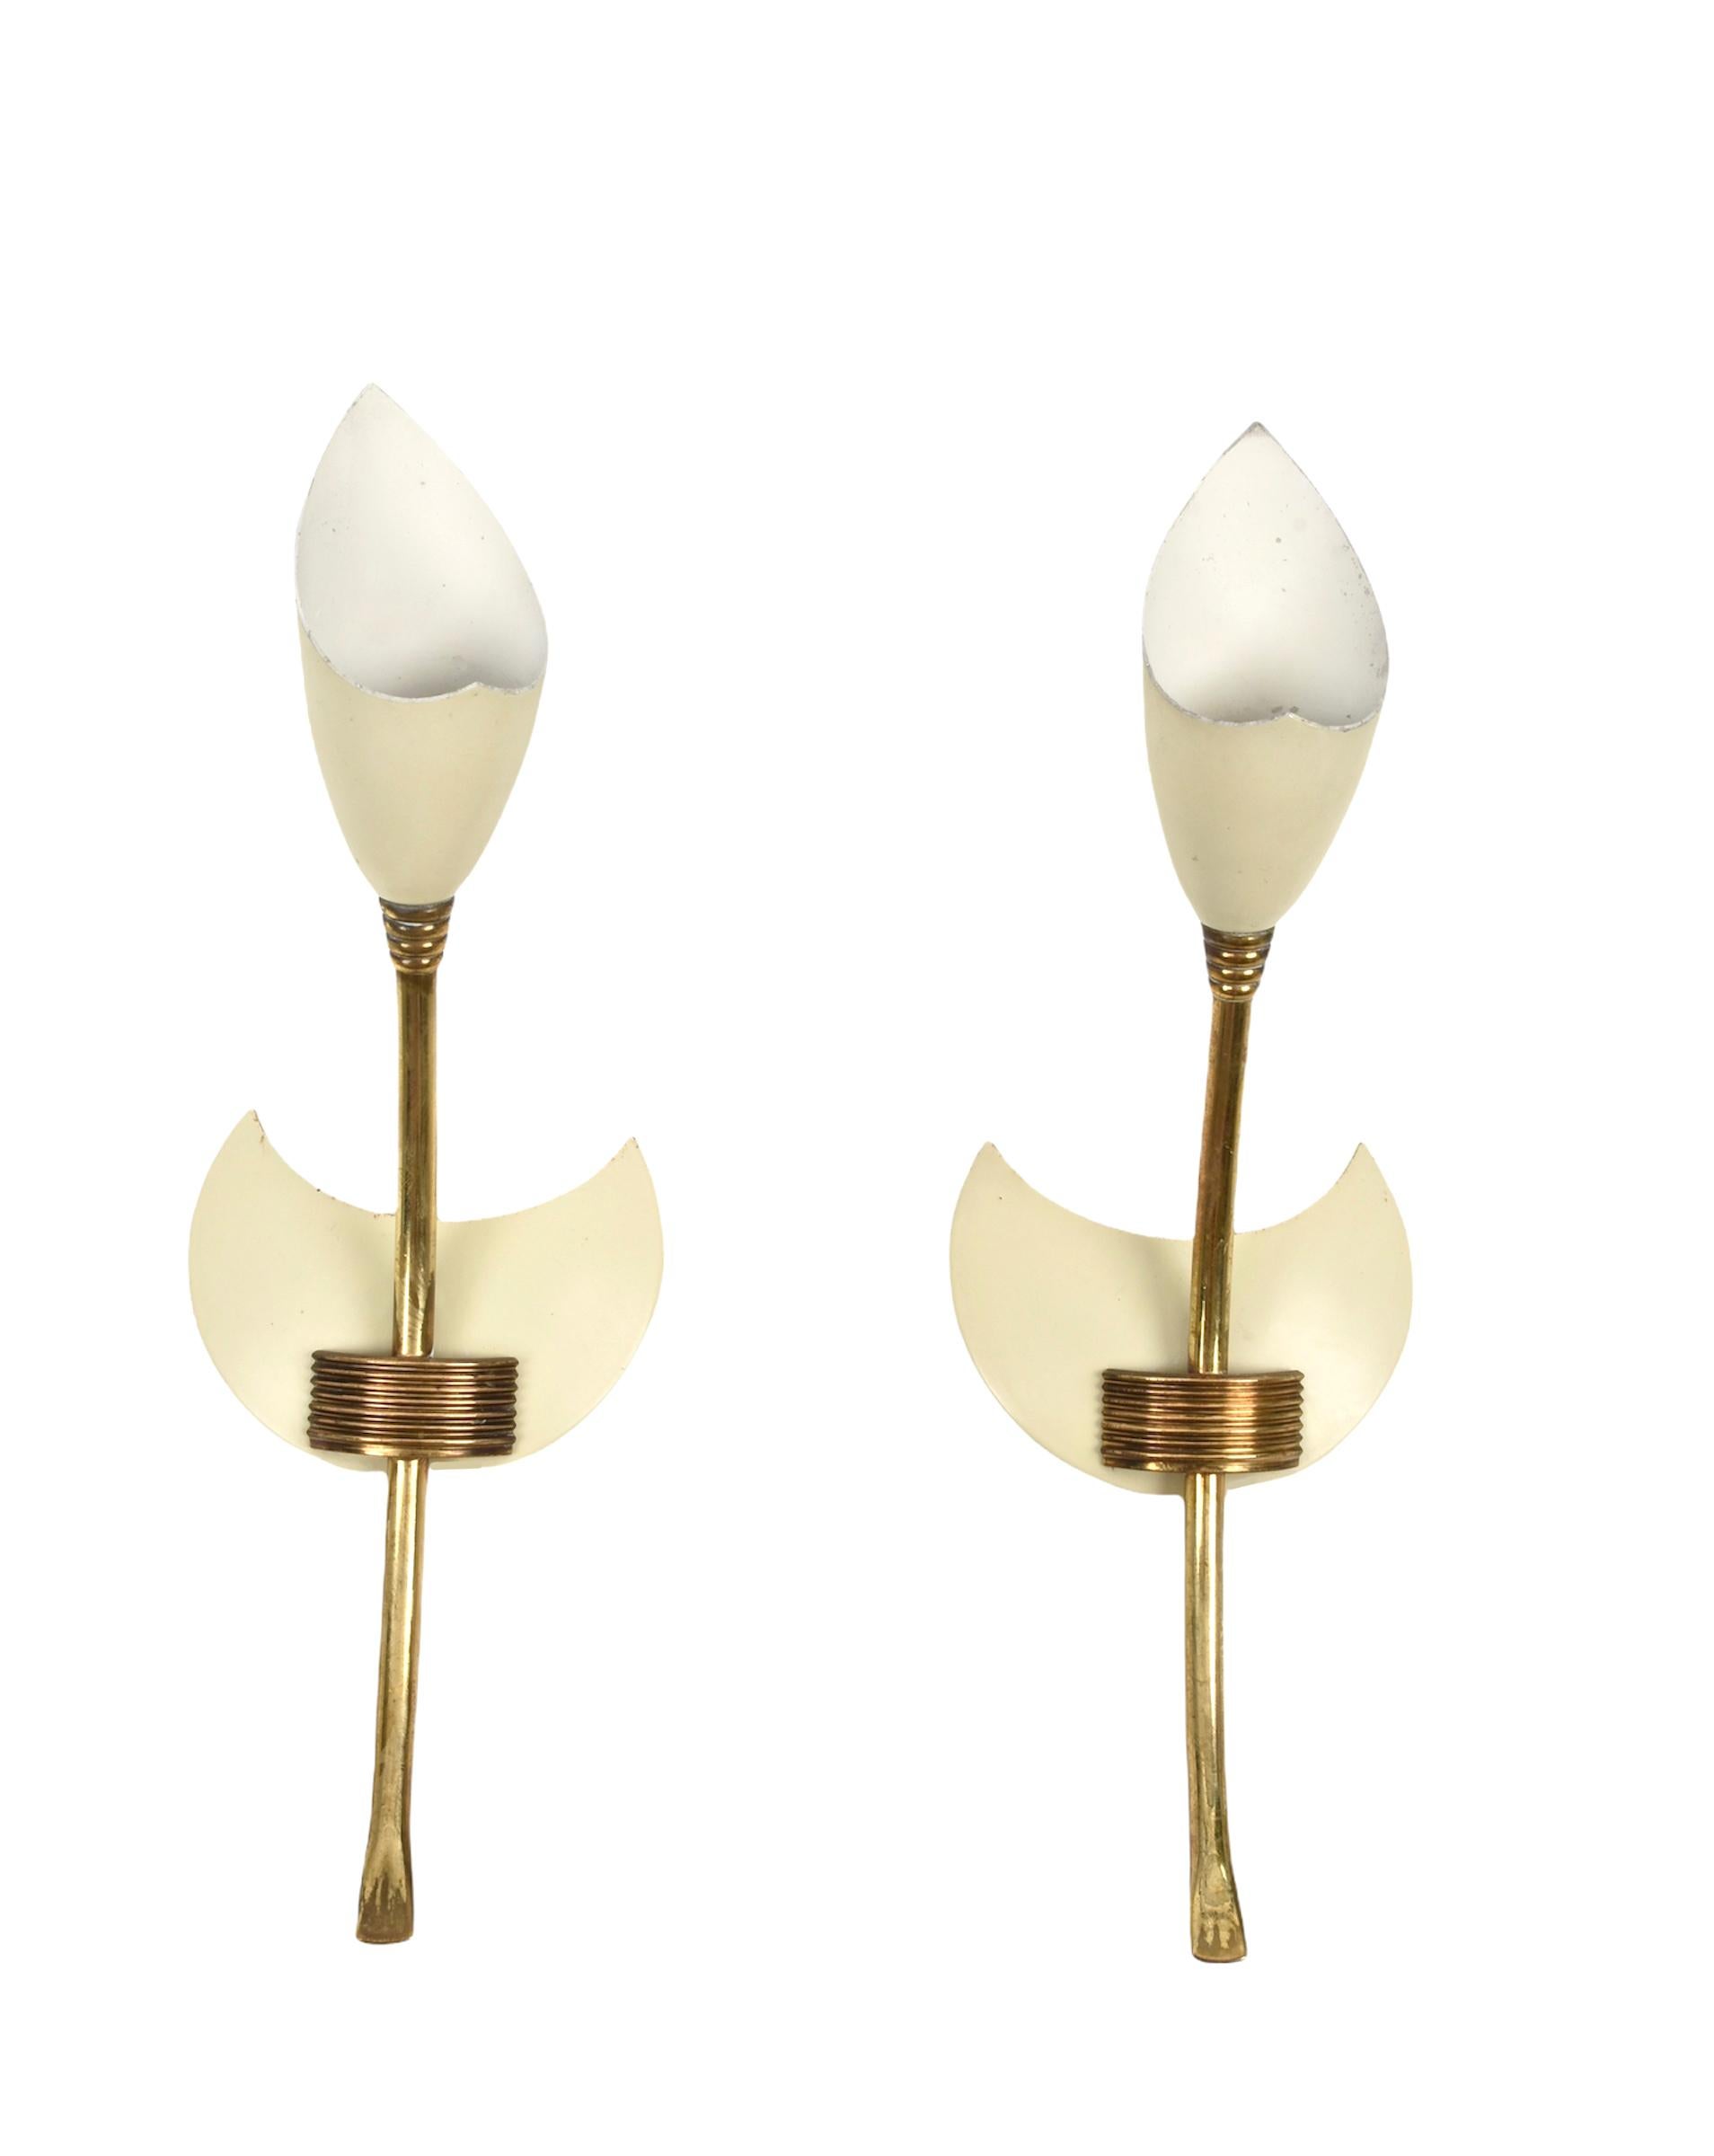 Enameled Pair of GCME Midcentury Brass and Enamelled Aluminum Italian Tulip Sconces 1950s For Sale